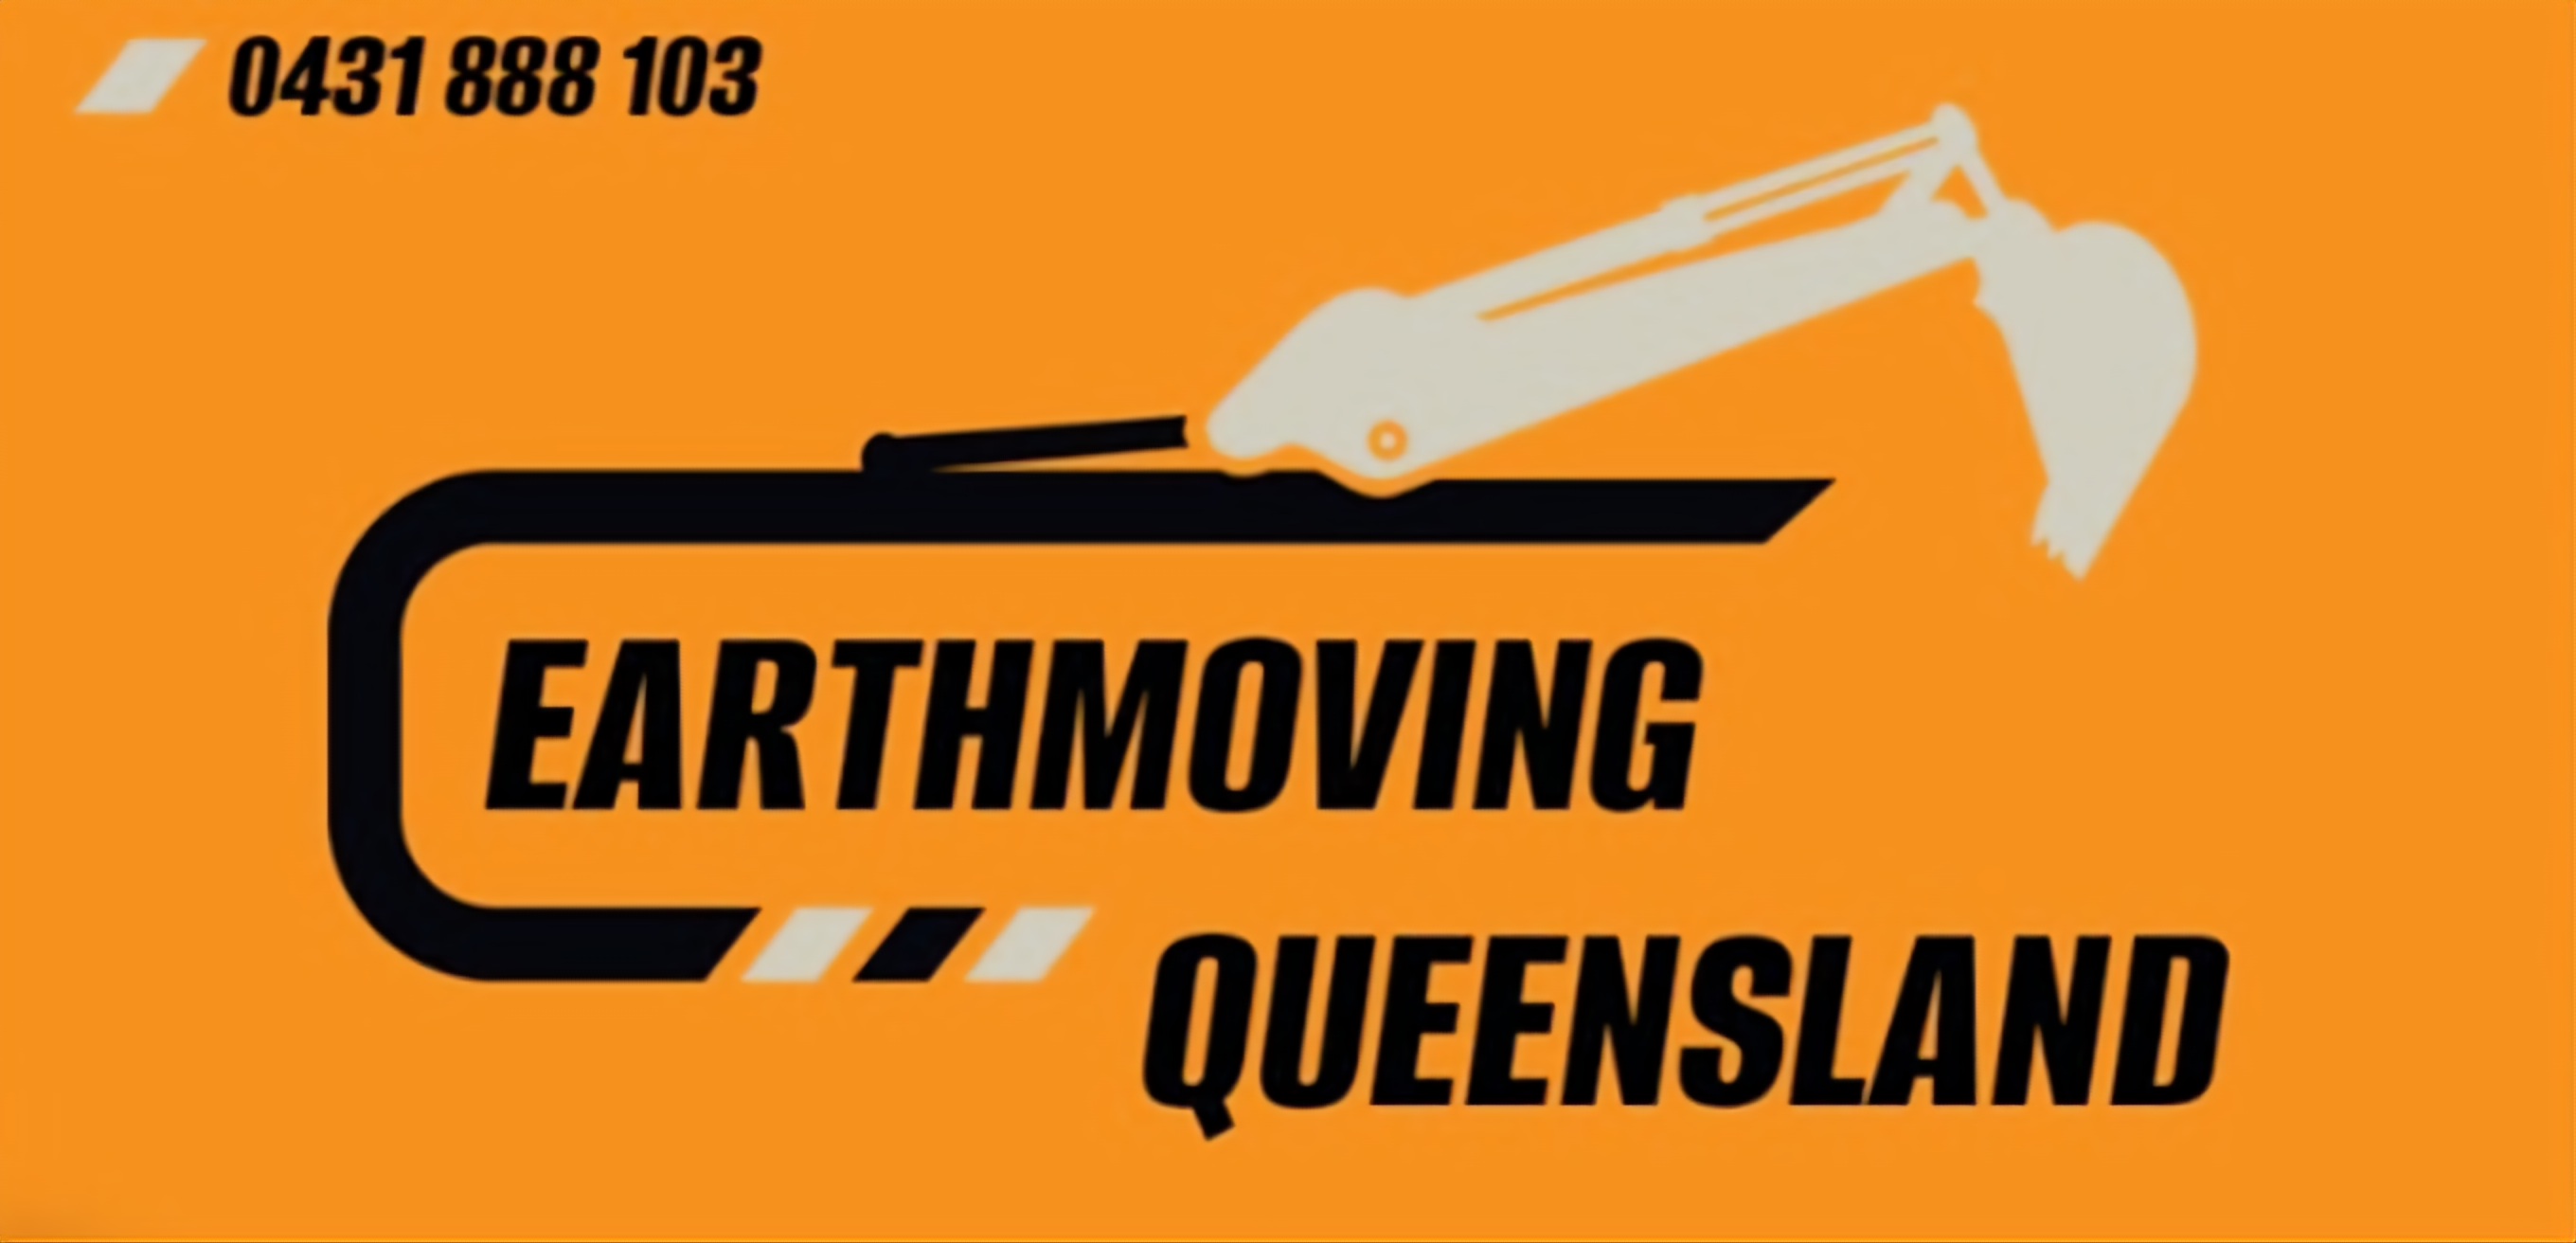 Images Earthmoving Queensland